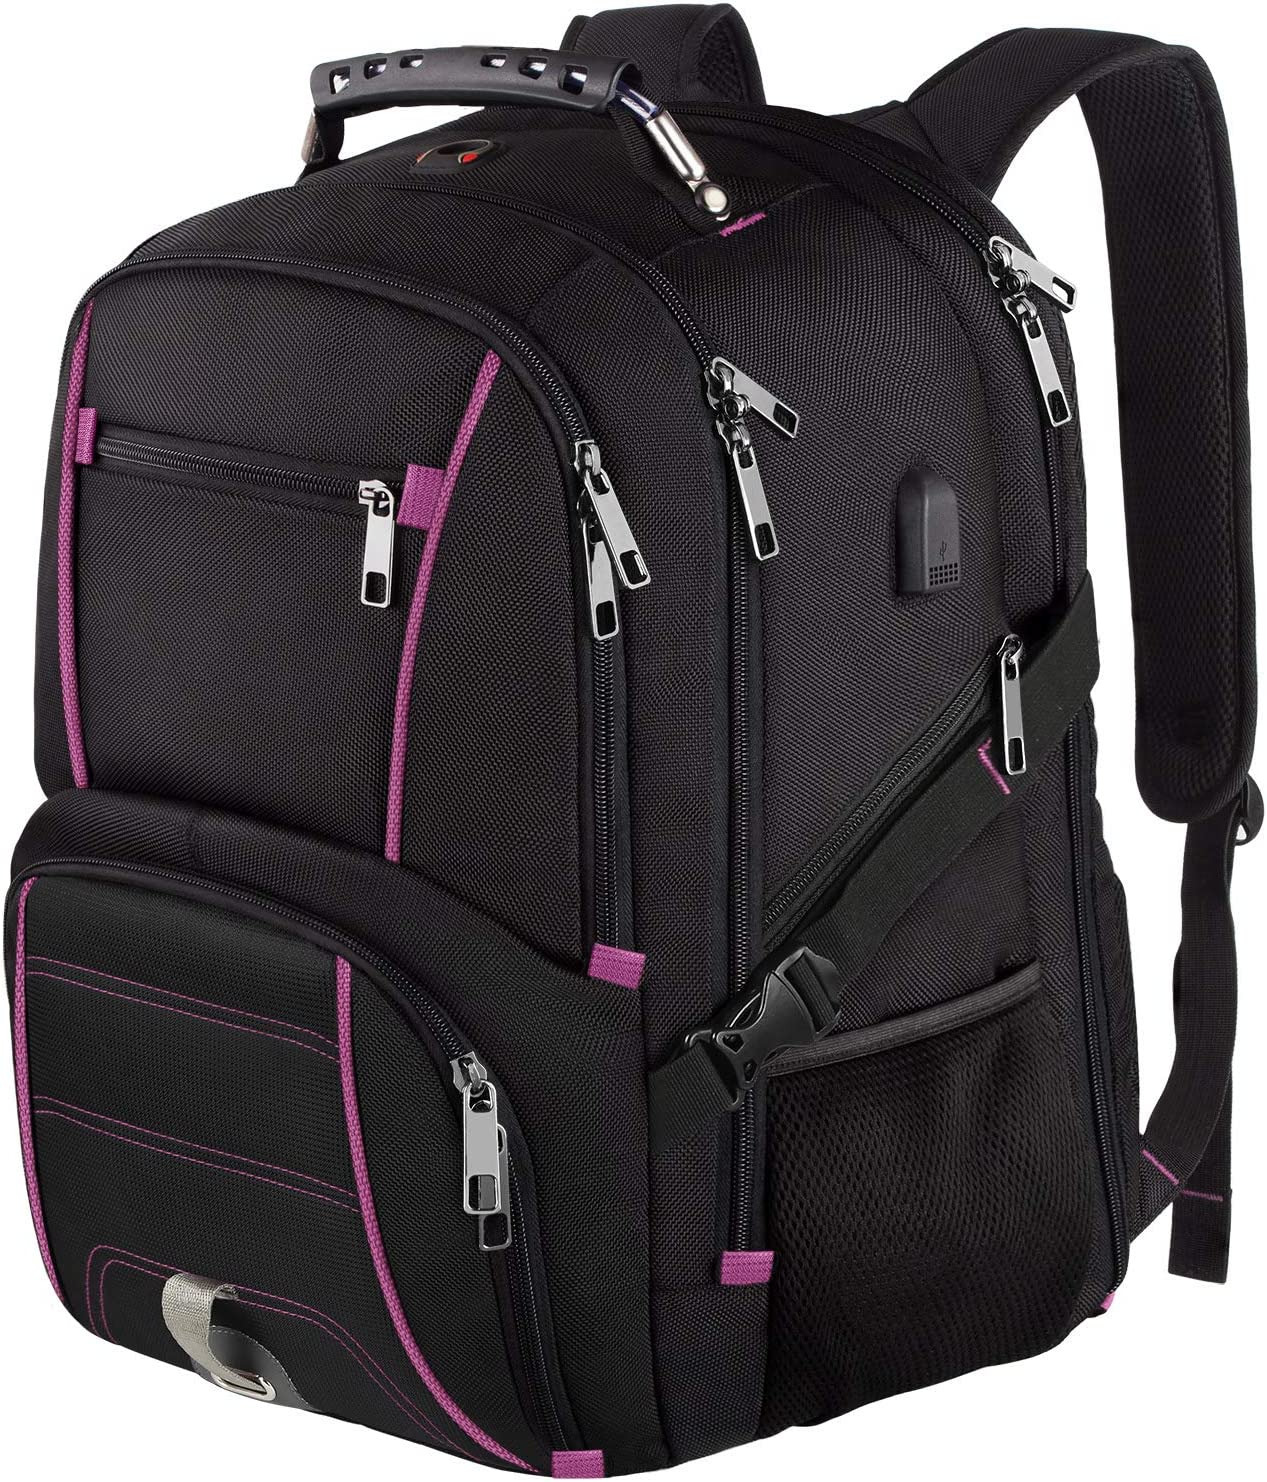 Extra Large Backpack,Tsa Friendly Durable Travel Laptop Computer Backpack for Me